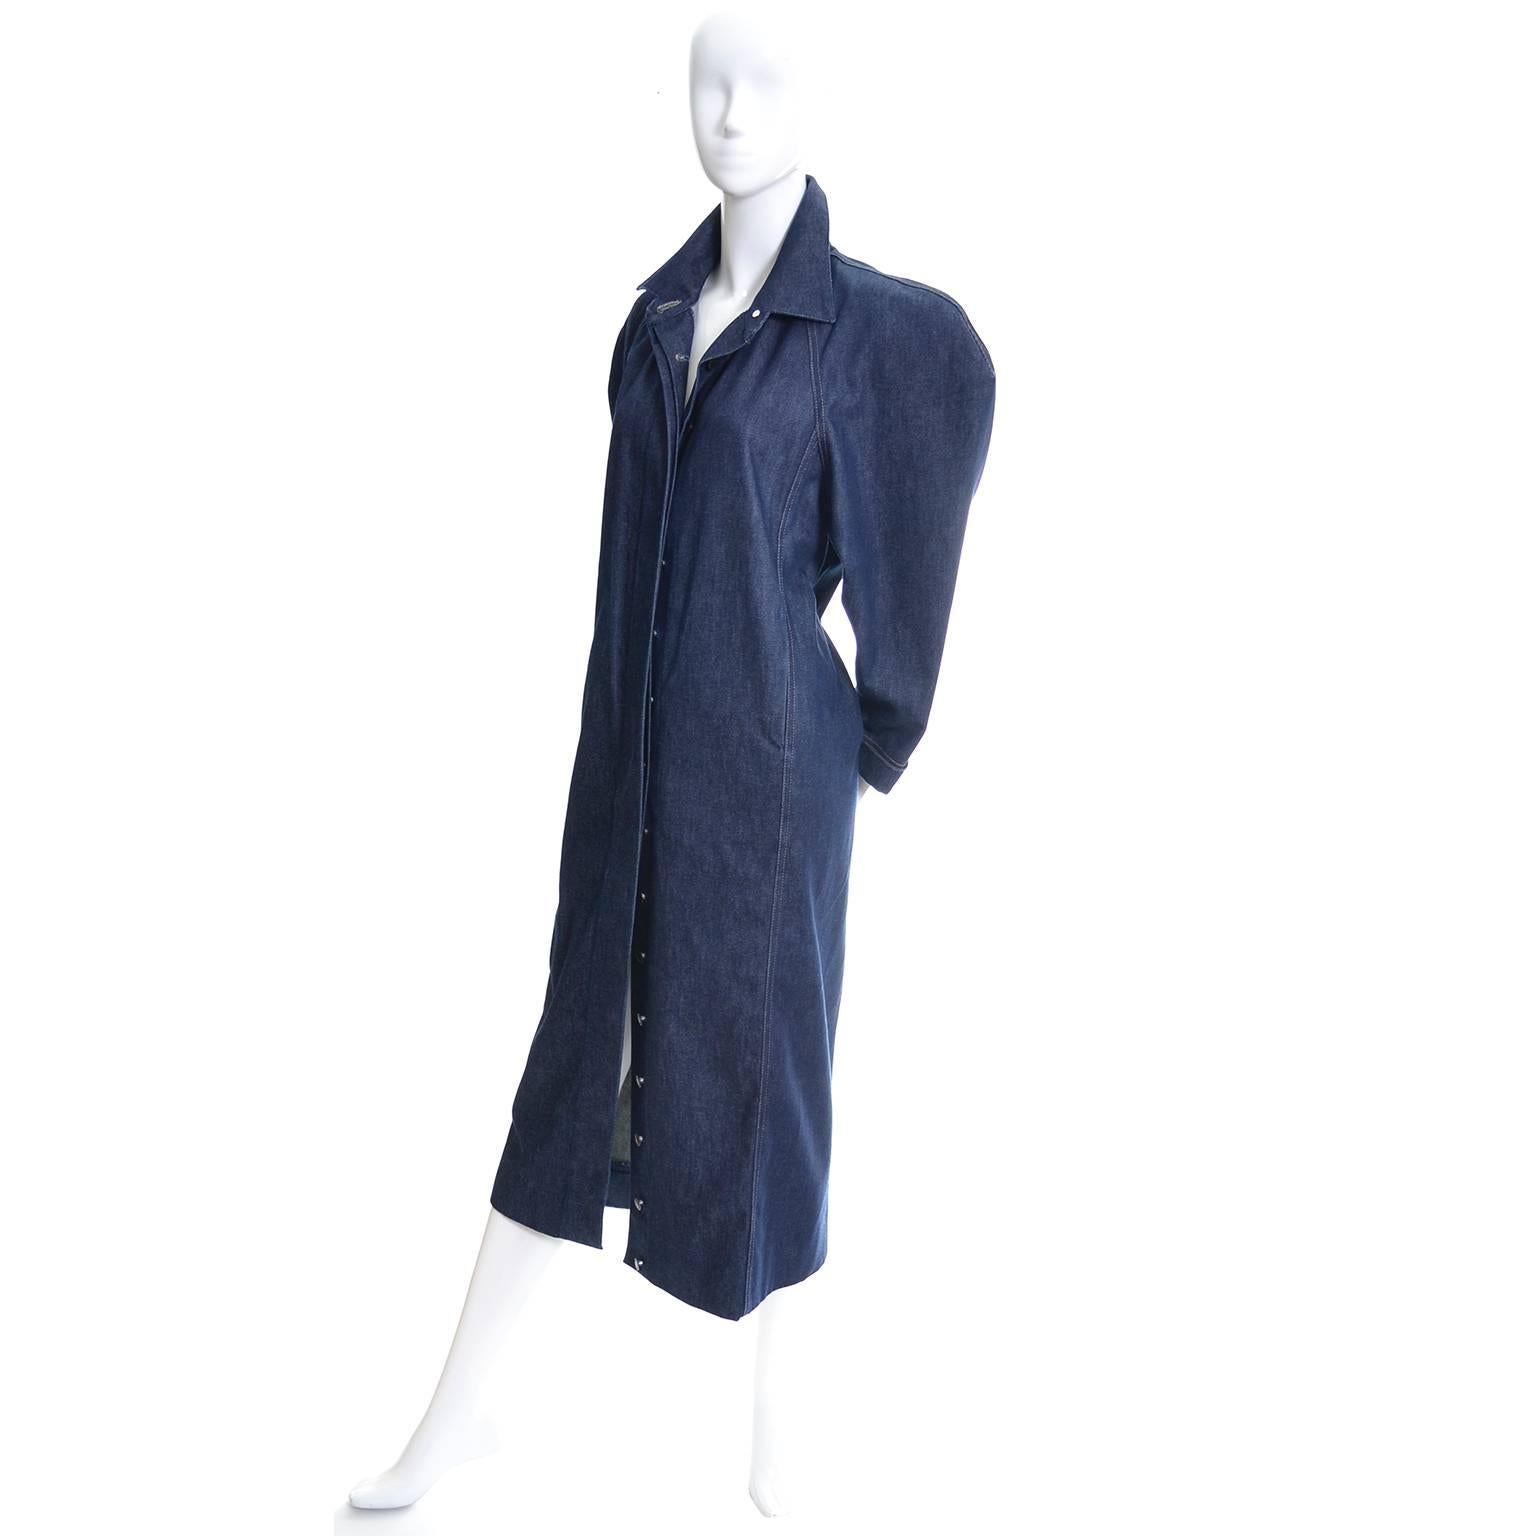 This fabulous vintage dress was designed by Norma Kamali in the 1980's and was purchased at the high end Portland, Oregon boutique "Mario's".  The dress is in a luxe denim and buttons up the front with brass buttons.  The classic Norma